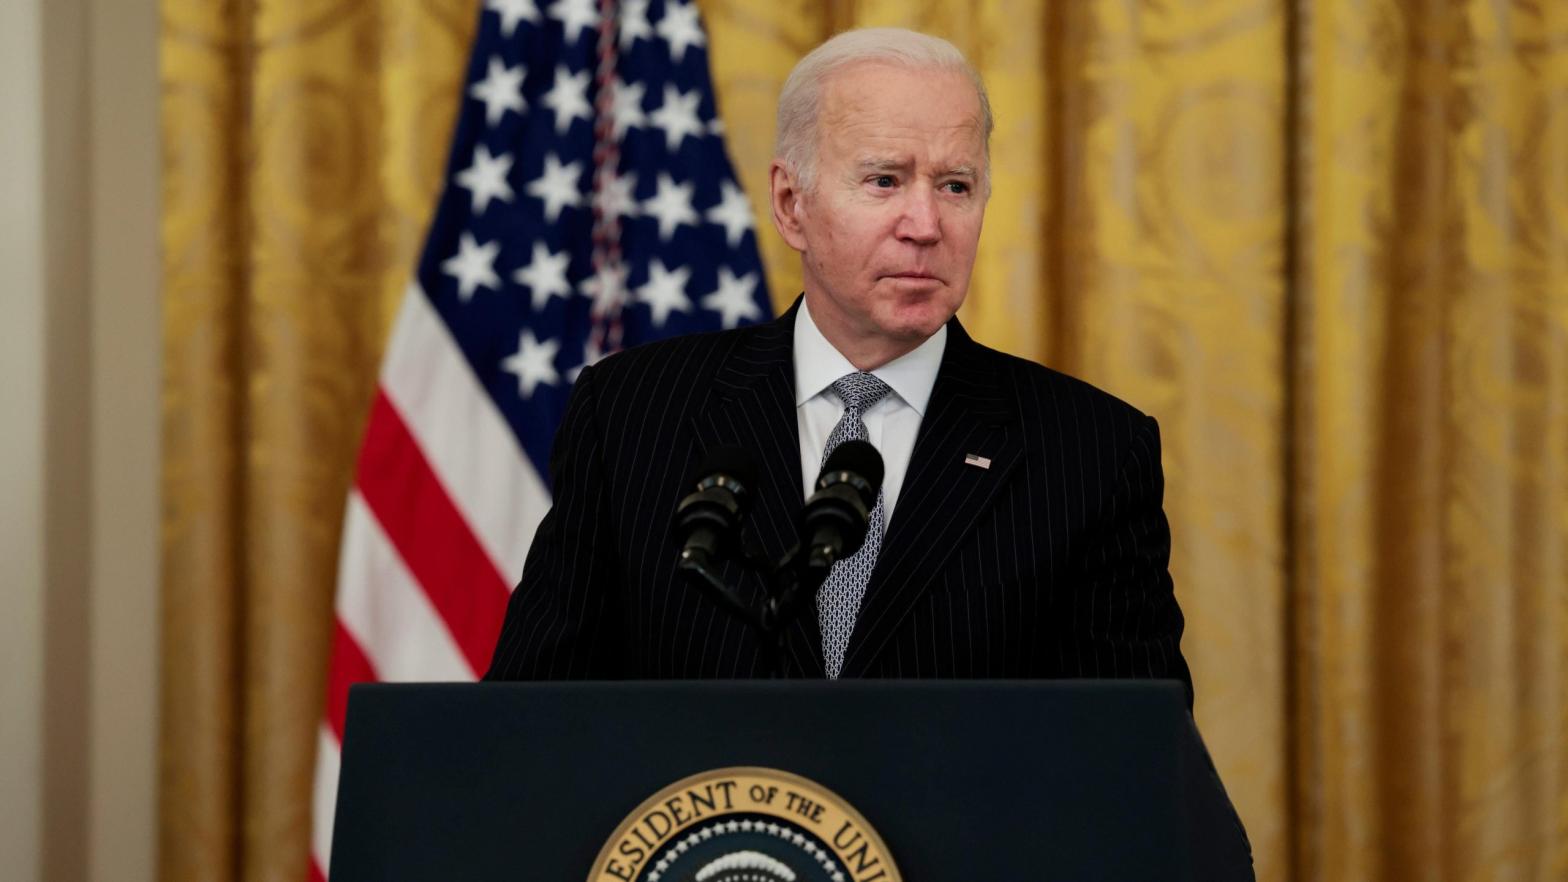 President Joe Biden gives remarks during a Cancer Moonshot initiative event in the East Room of the White House on February 02, 2022 in Washington, DC.  (Photo: Anna Moneymaker, Getty Images)